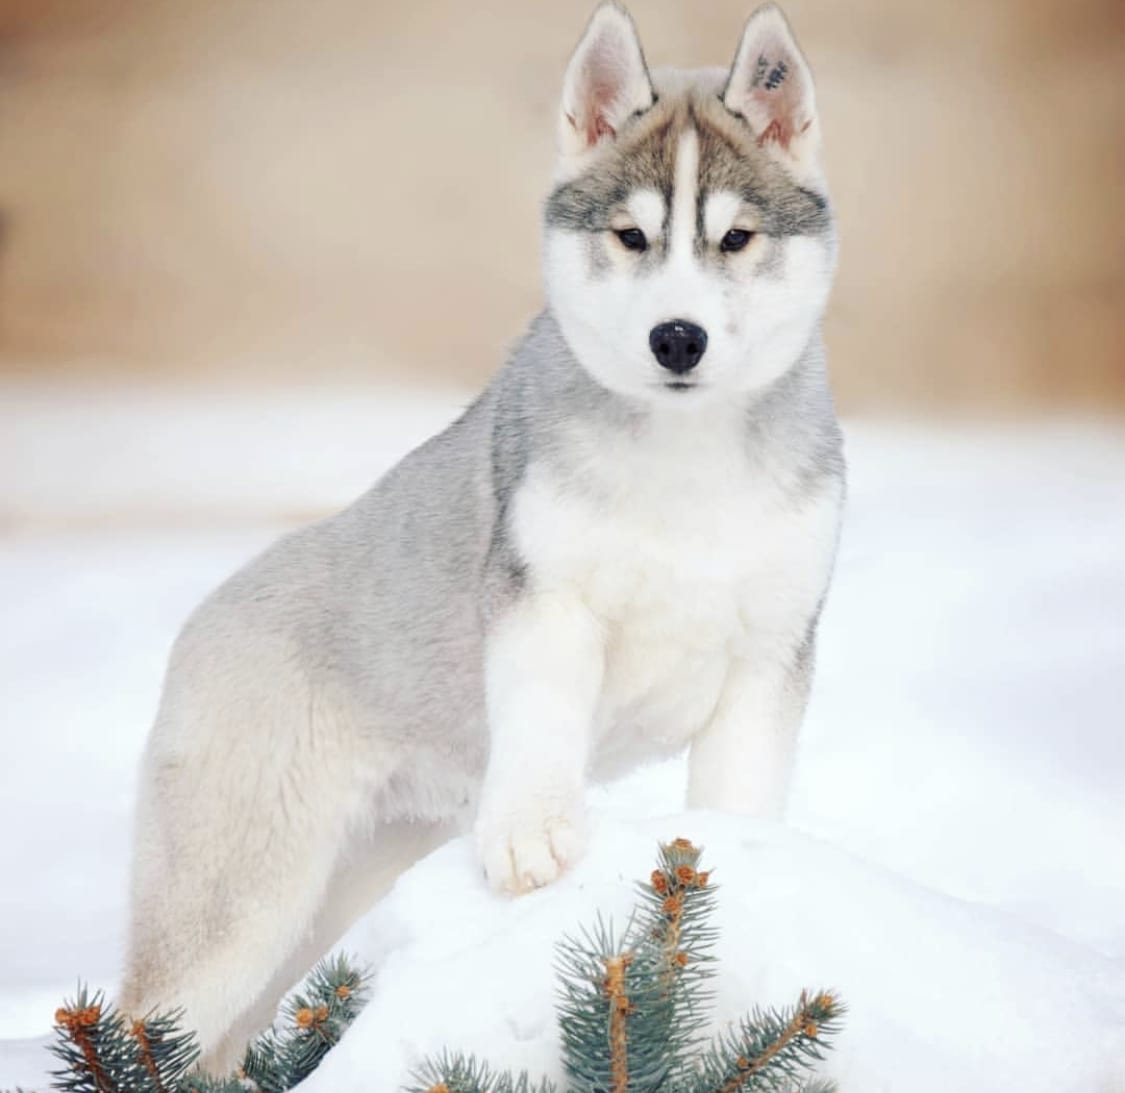 A Husky puppy standing up on top of the small pile of snow